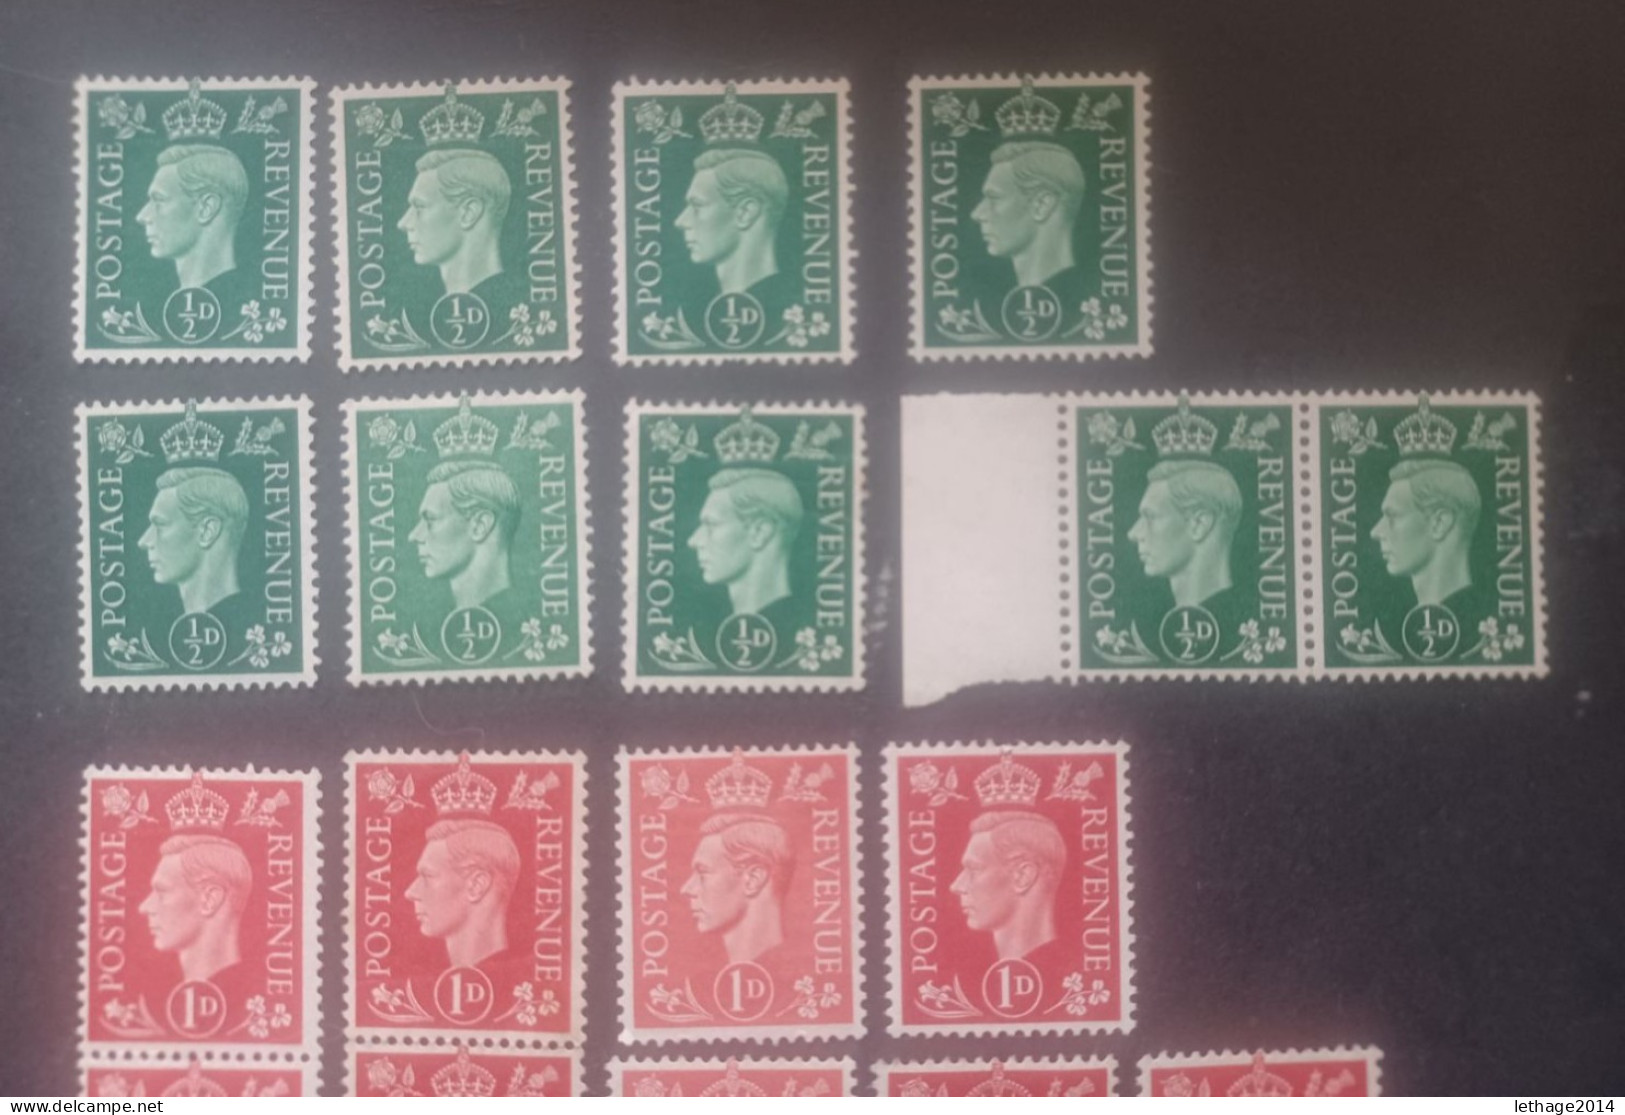 ENGLAND BRITISH 1937 EFFIGIE DI KING GEORGE VII MNH CAT UNIF. 209-209A-210-210A-211-213 - Unused Stamps